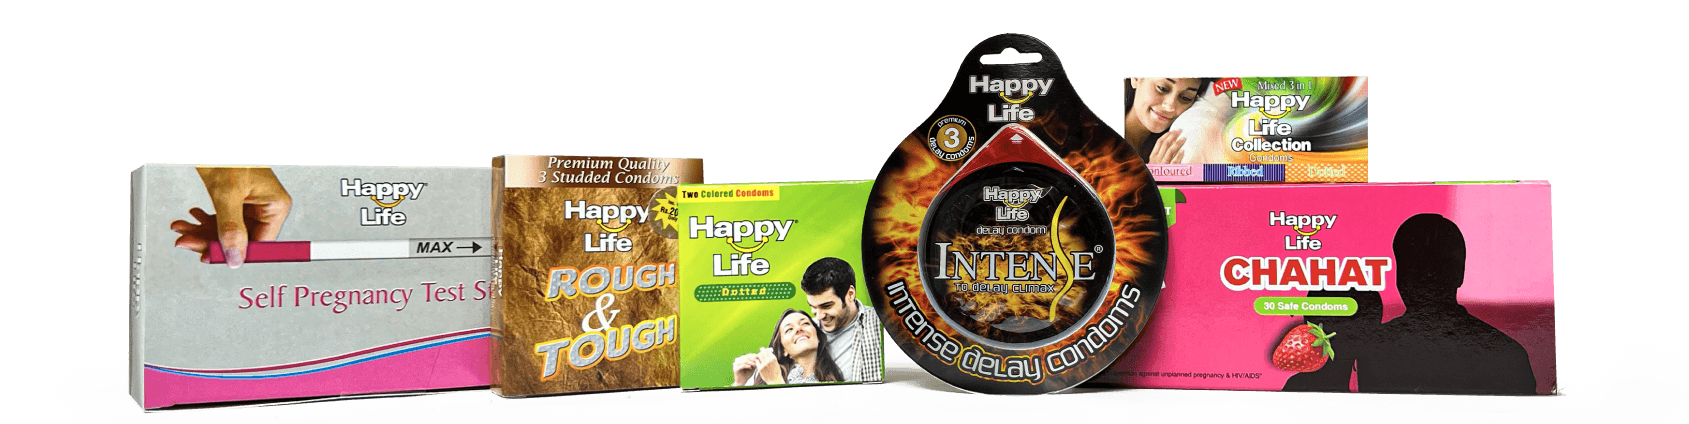 Shop Online Happy Life - Affordable Personal Care & Wellness Collection In Pakistan